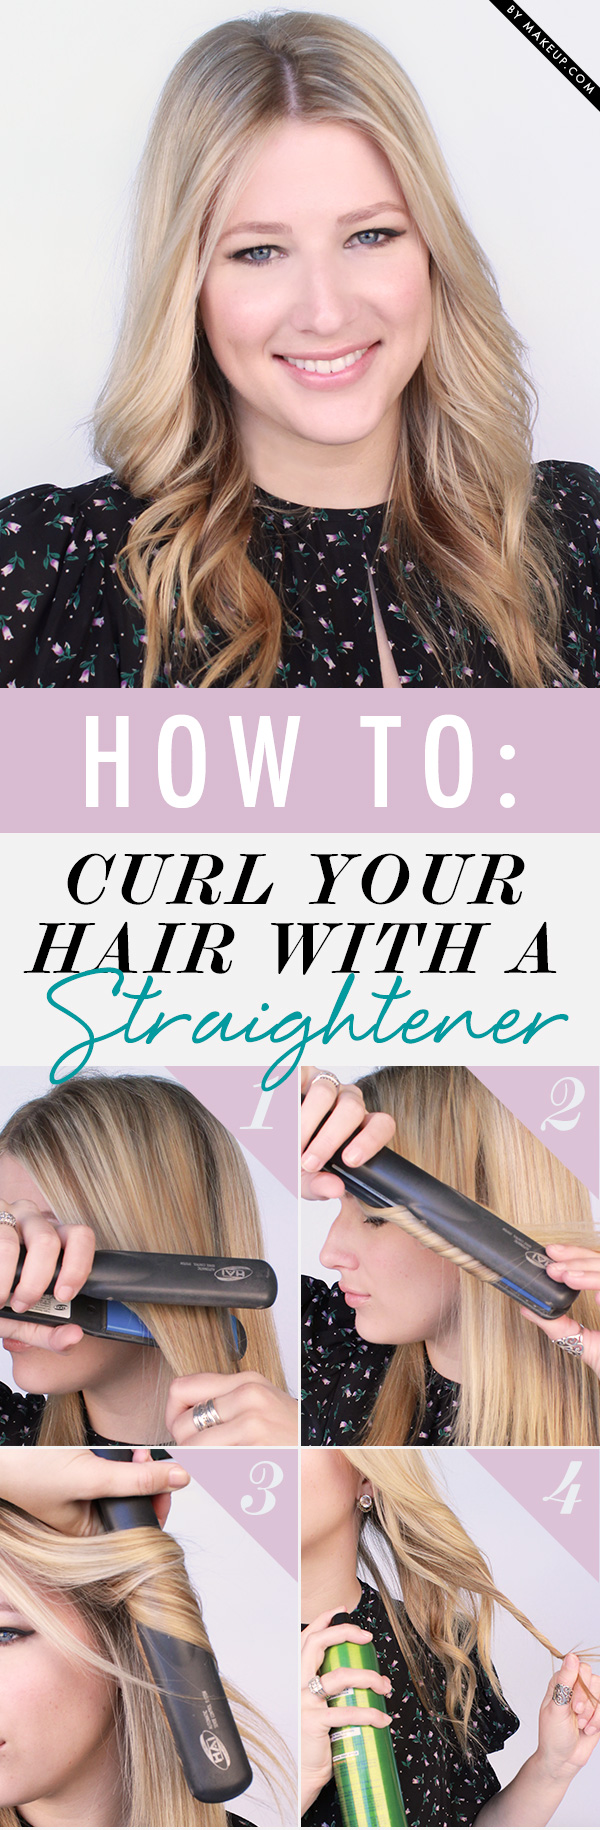 15 Hair Hacks, Tips and Tricks That Will Make Your Hair Look Better